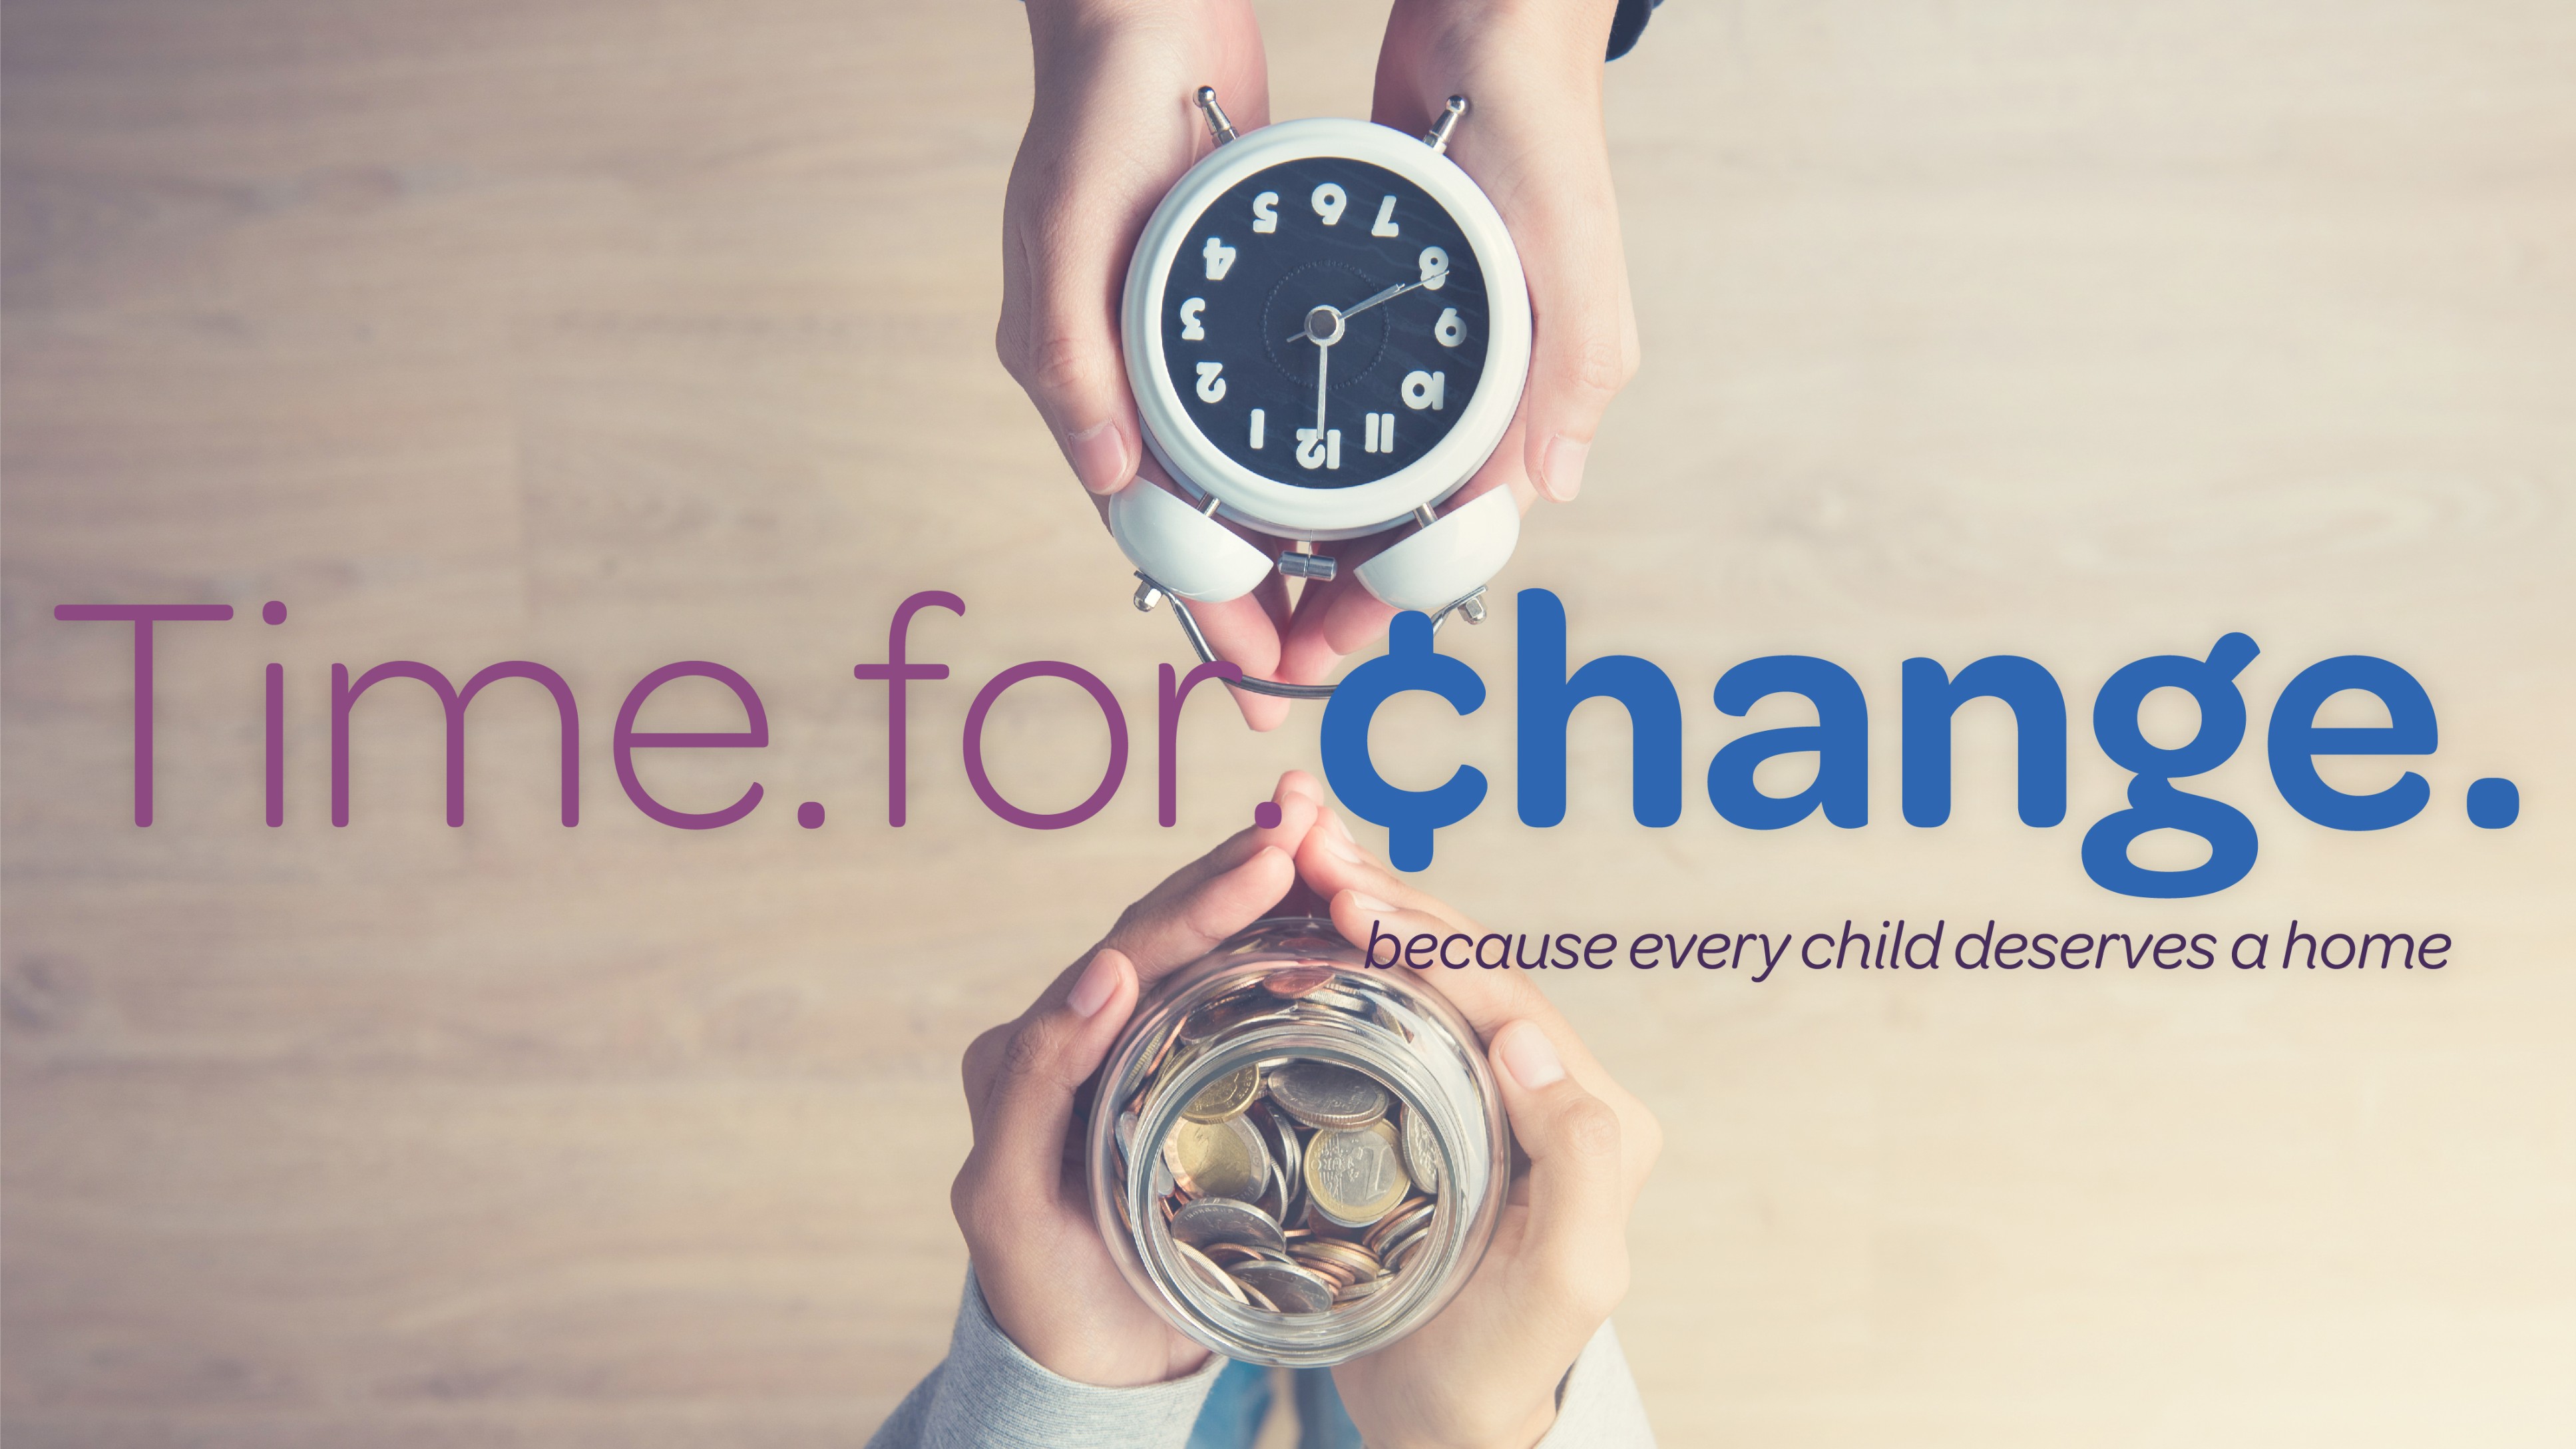 Time for Change image